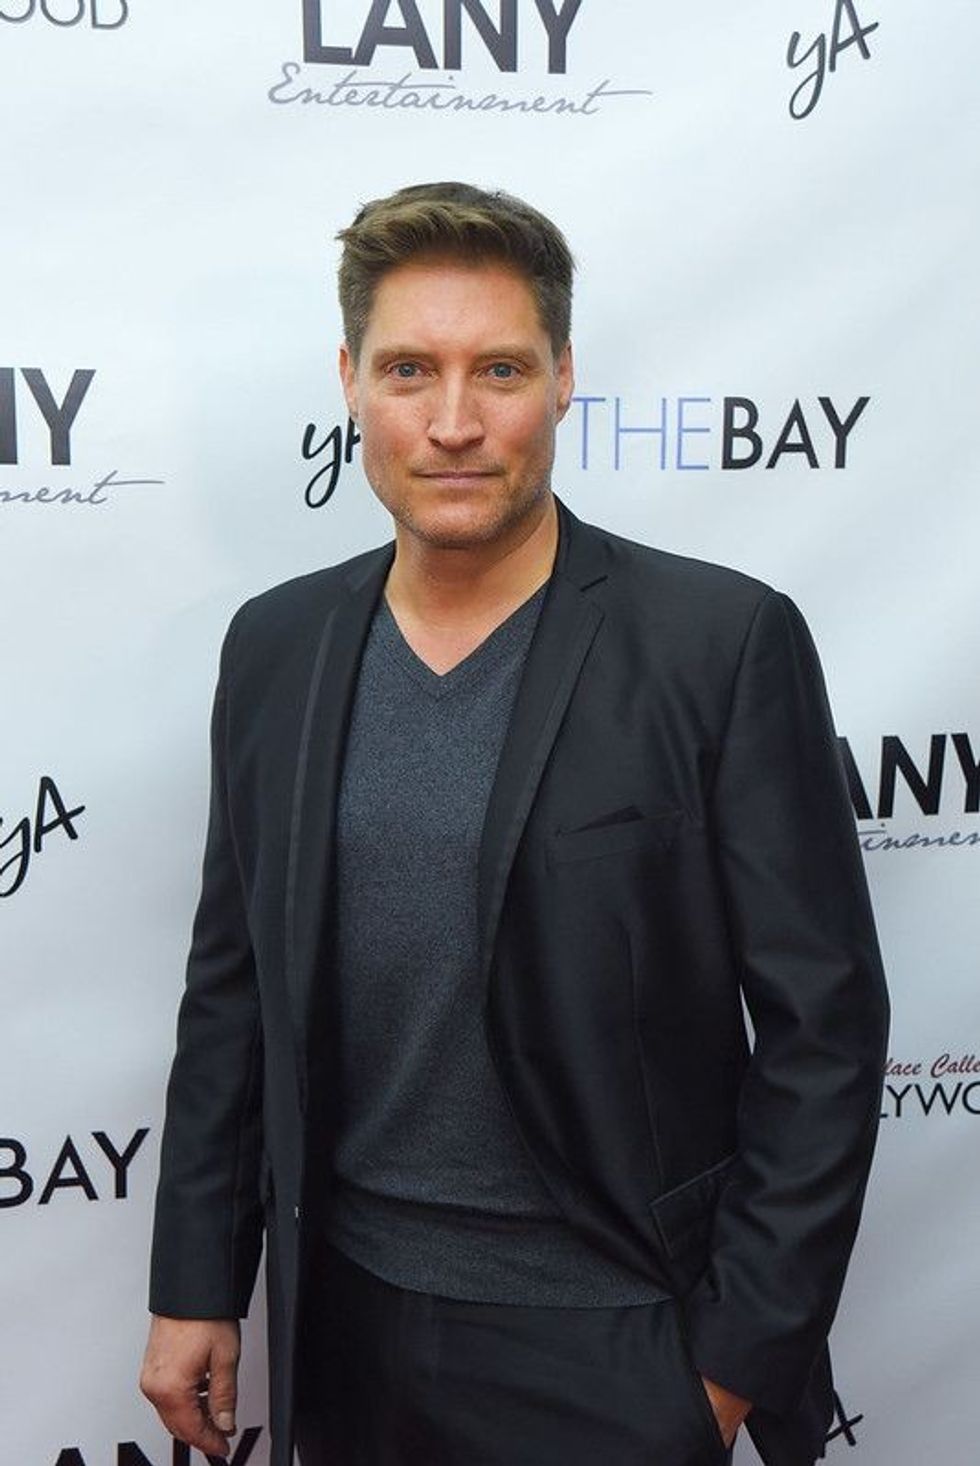 Sean Kanan is a Famous American actor, producer, and author